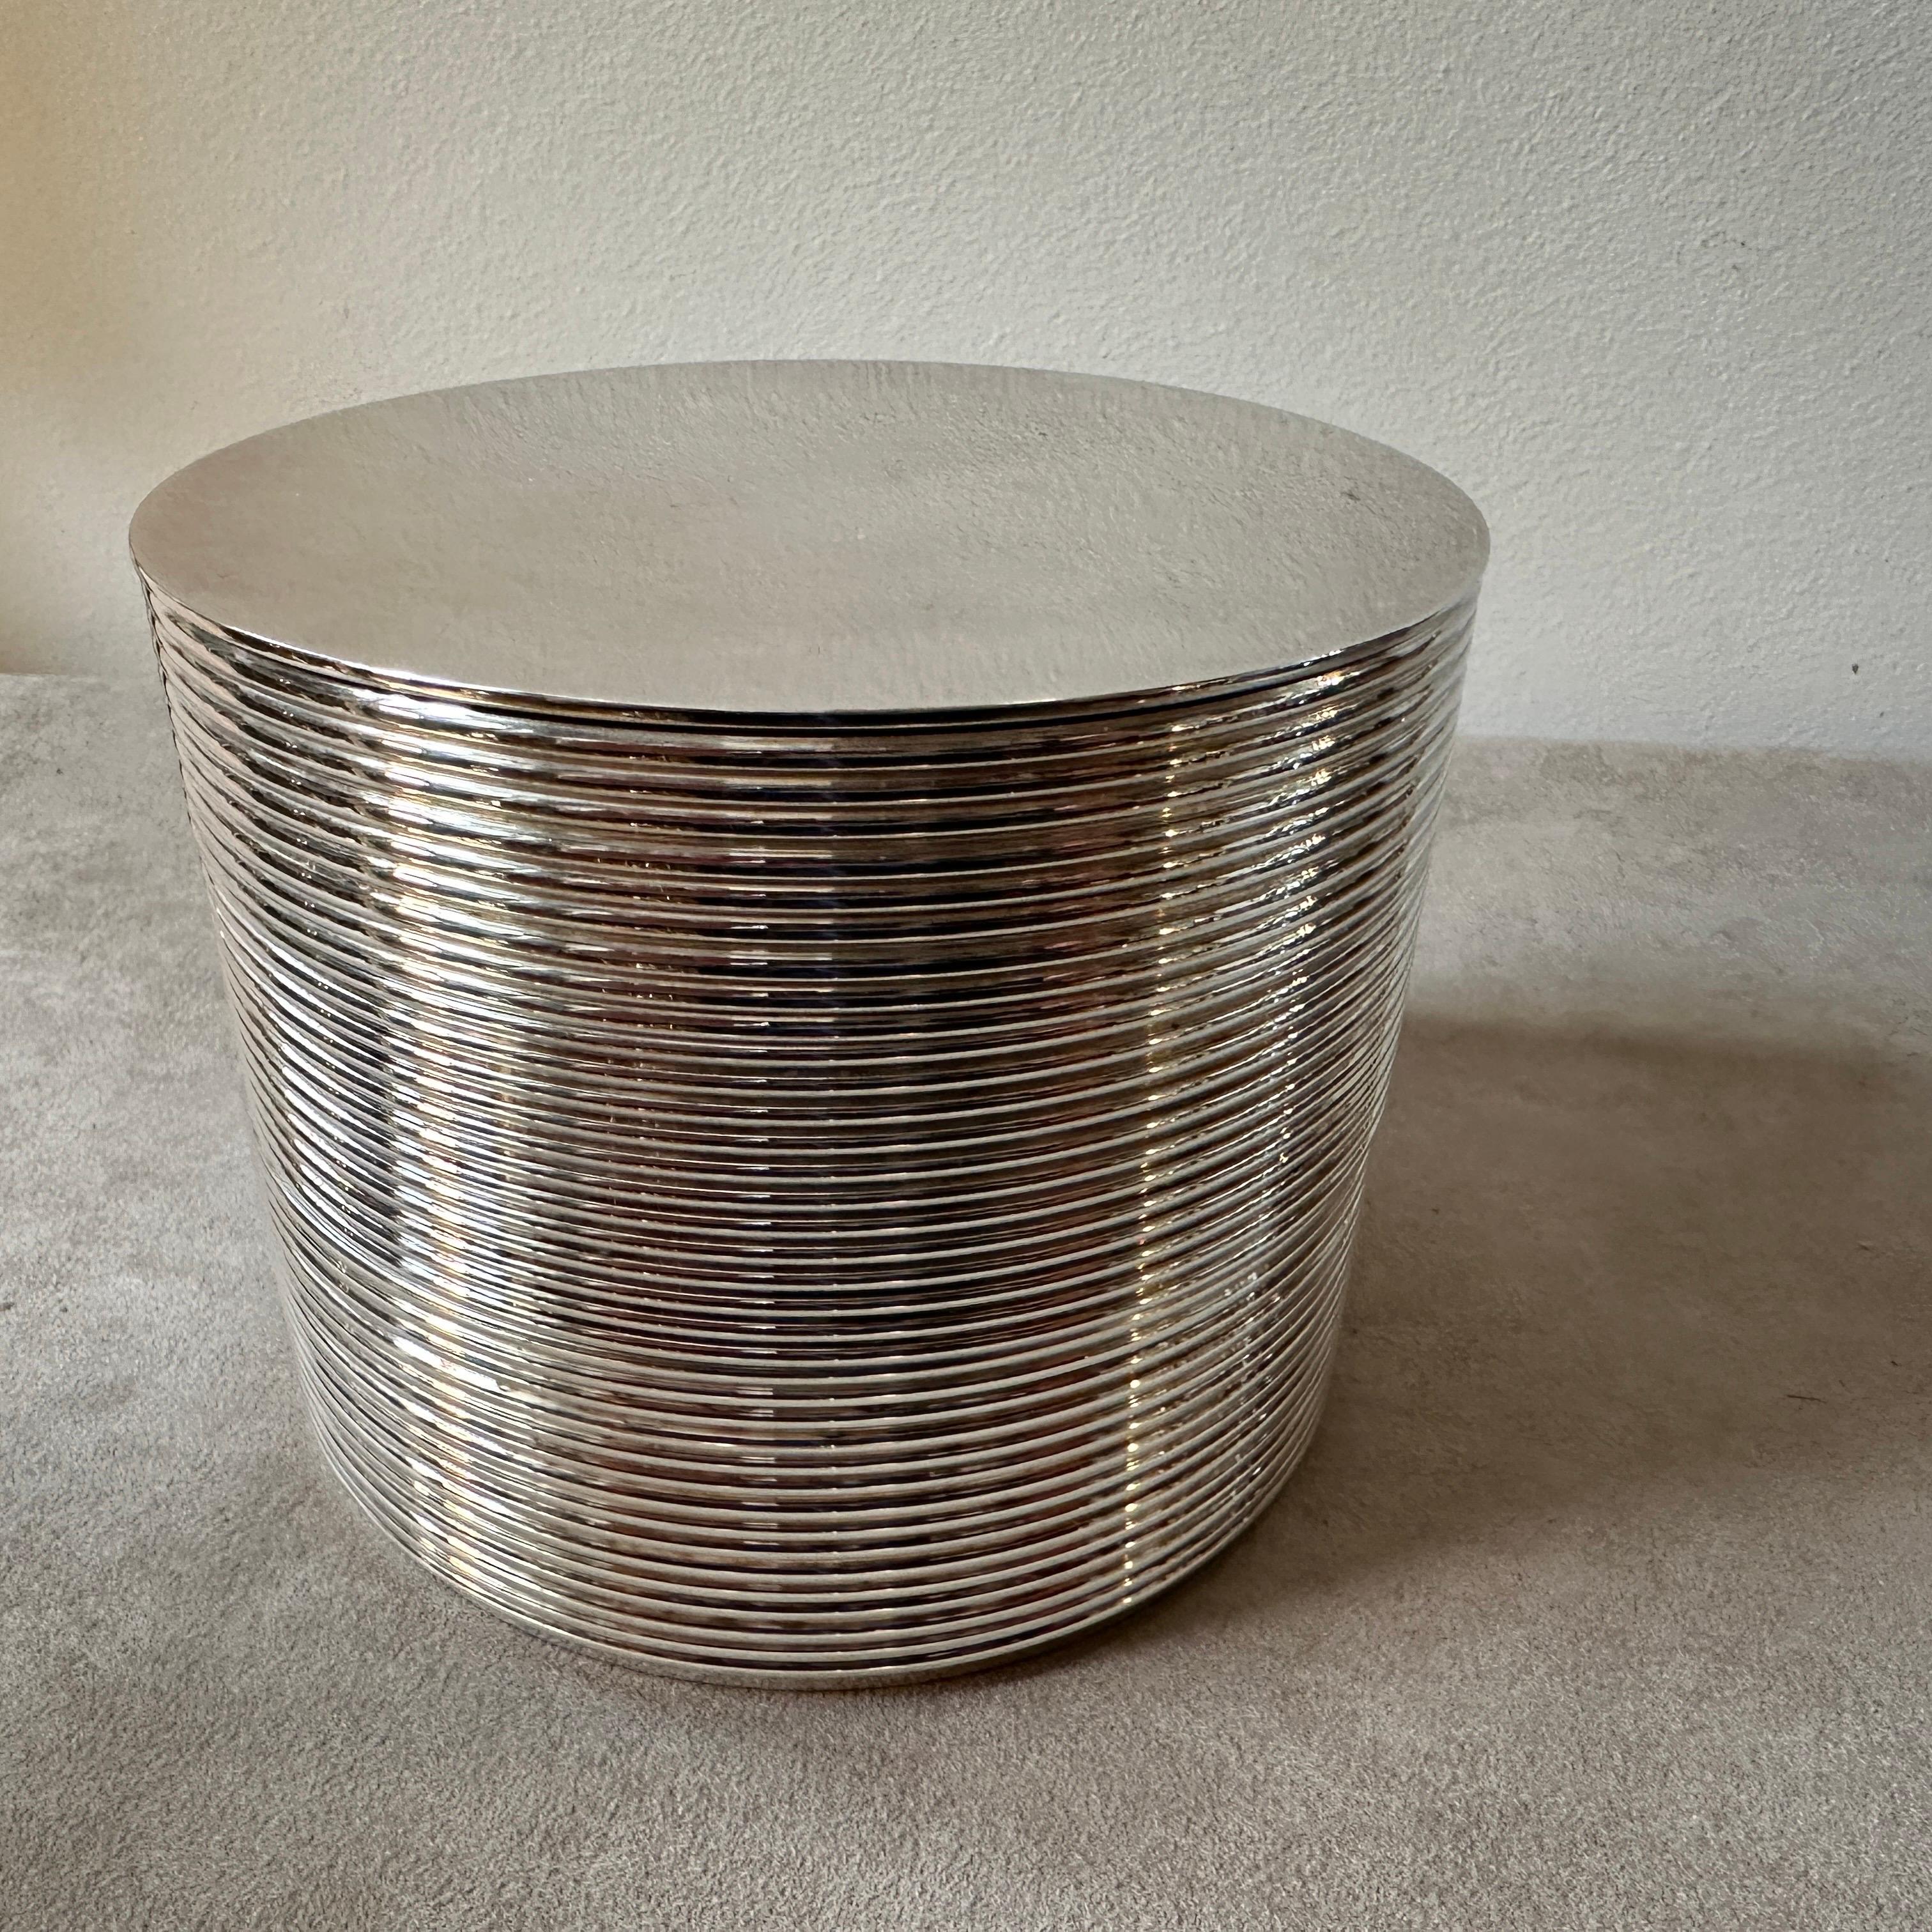 A stylish three-level round silver-plated box, designed by KT Studio for Christofle in 1998 with input from Thomas Keller and Adam Tihany, is a remarkable piece of modernist craftsmanship. When closed, it's a modernist cylinder; when opened, it